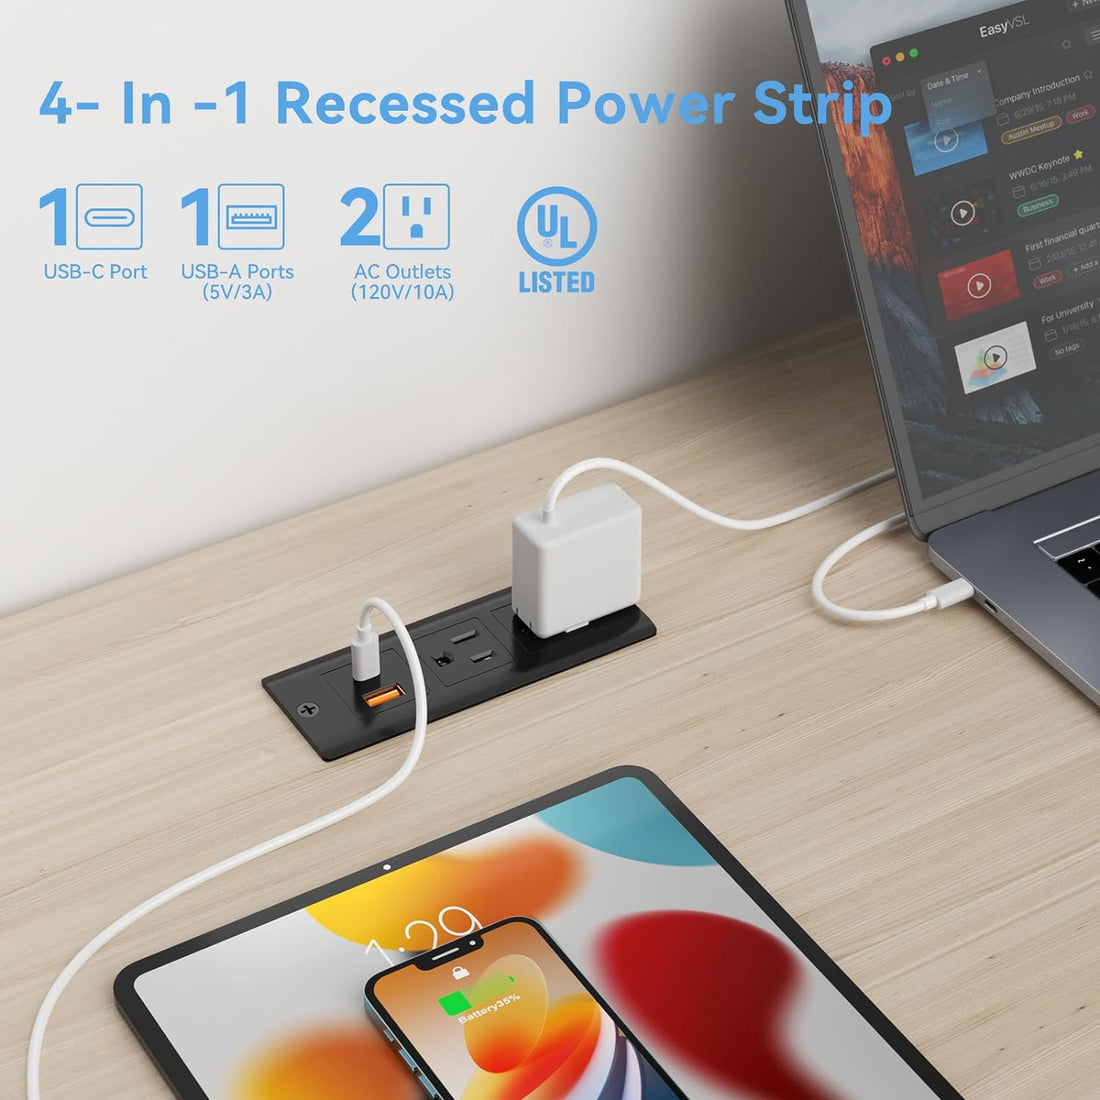 Lightning-Fast Charging: The 20W USB-C Fast Charging Station